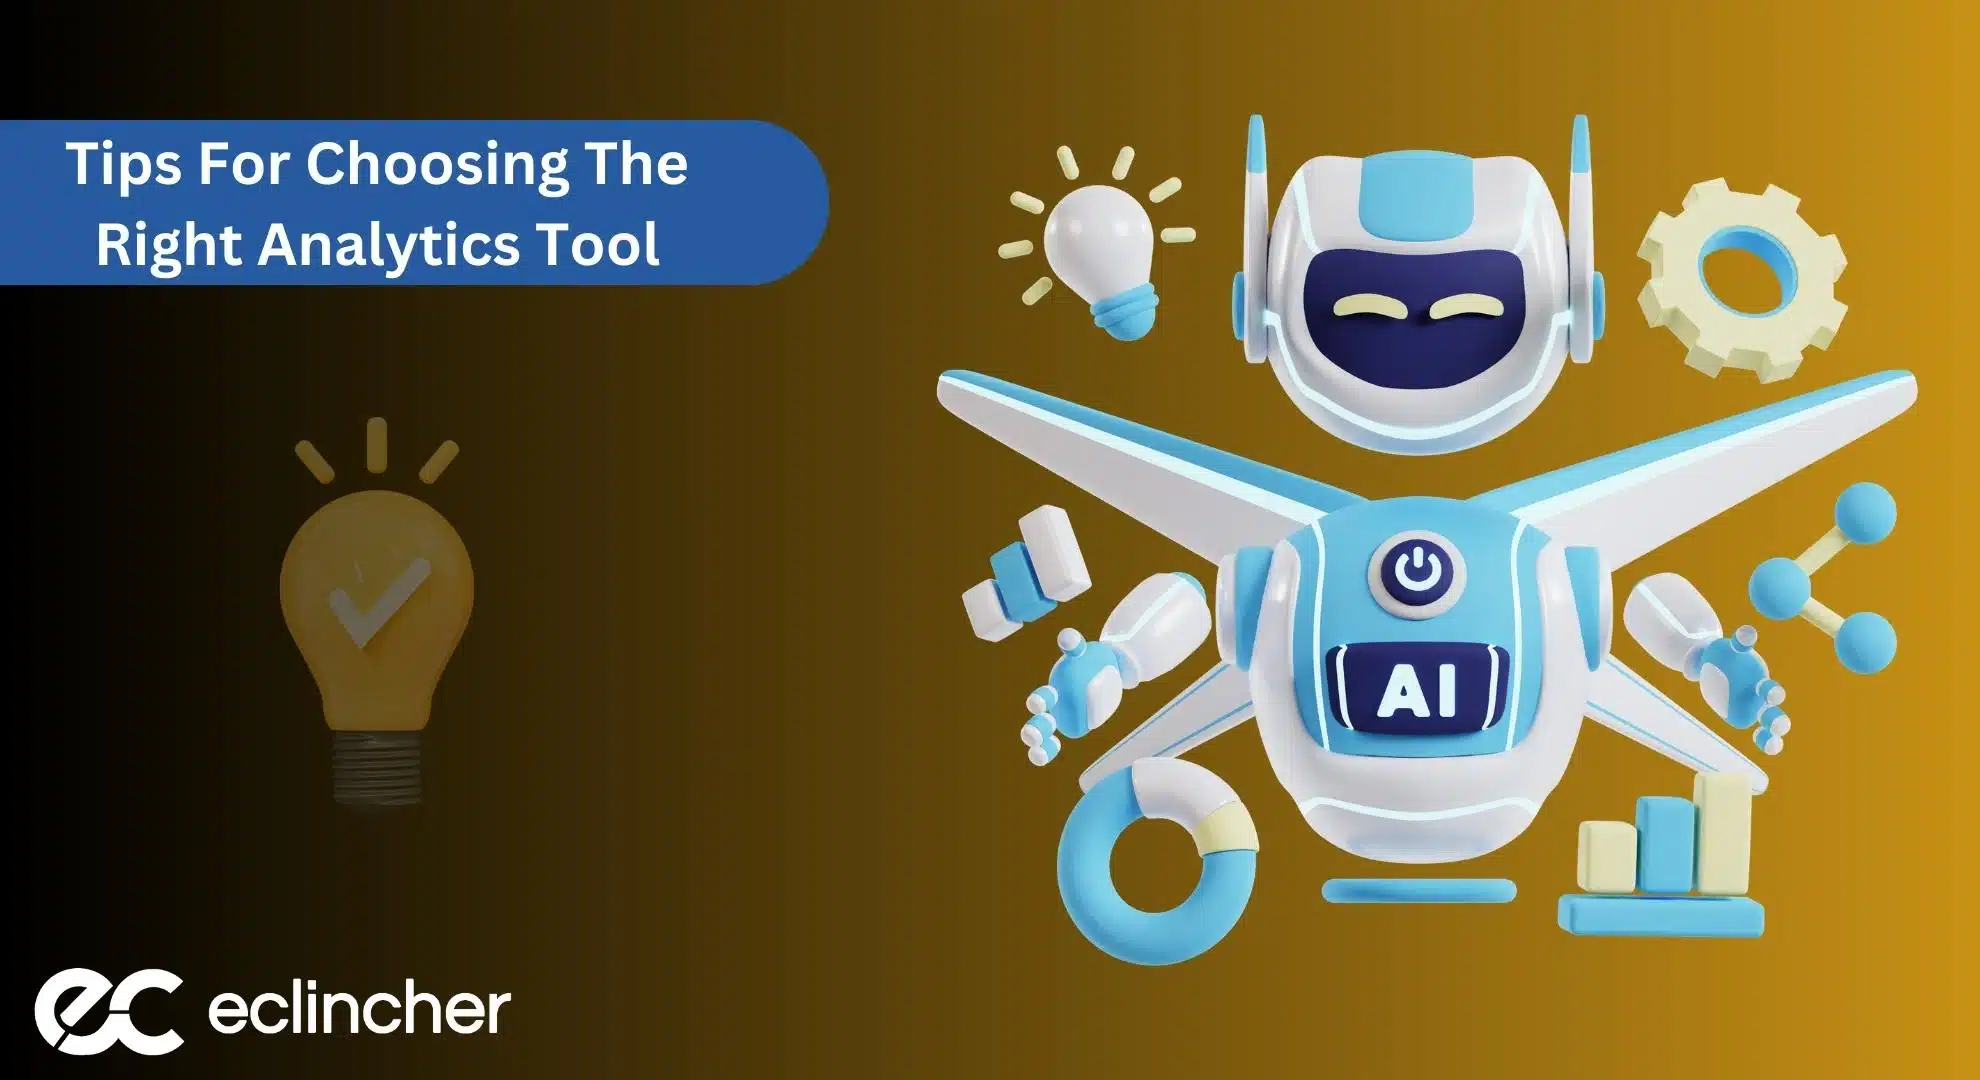 Tips For Choosing The Right Analytics Tool